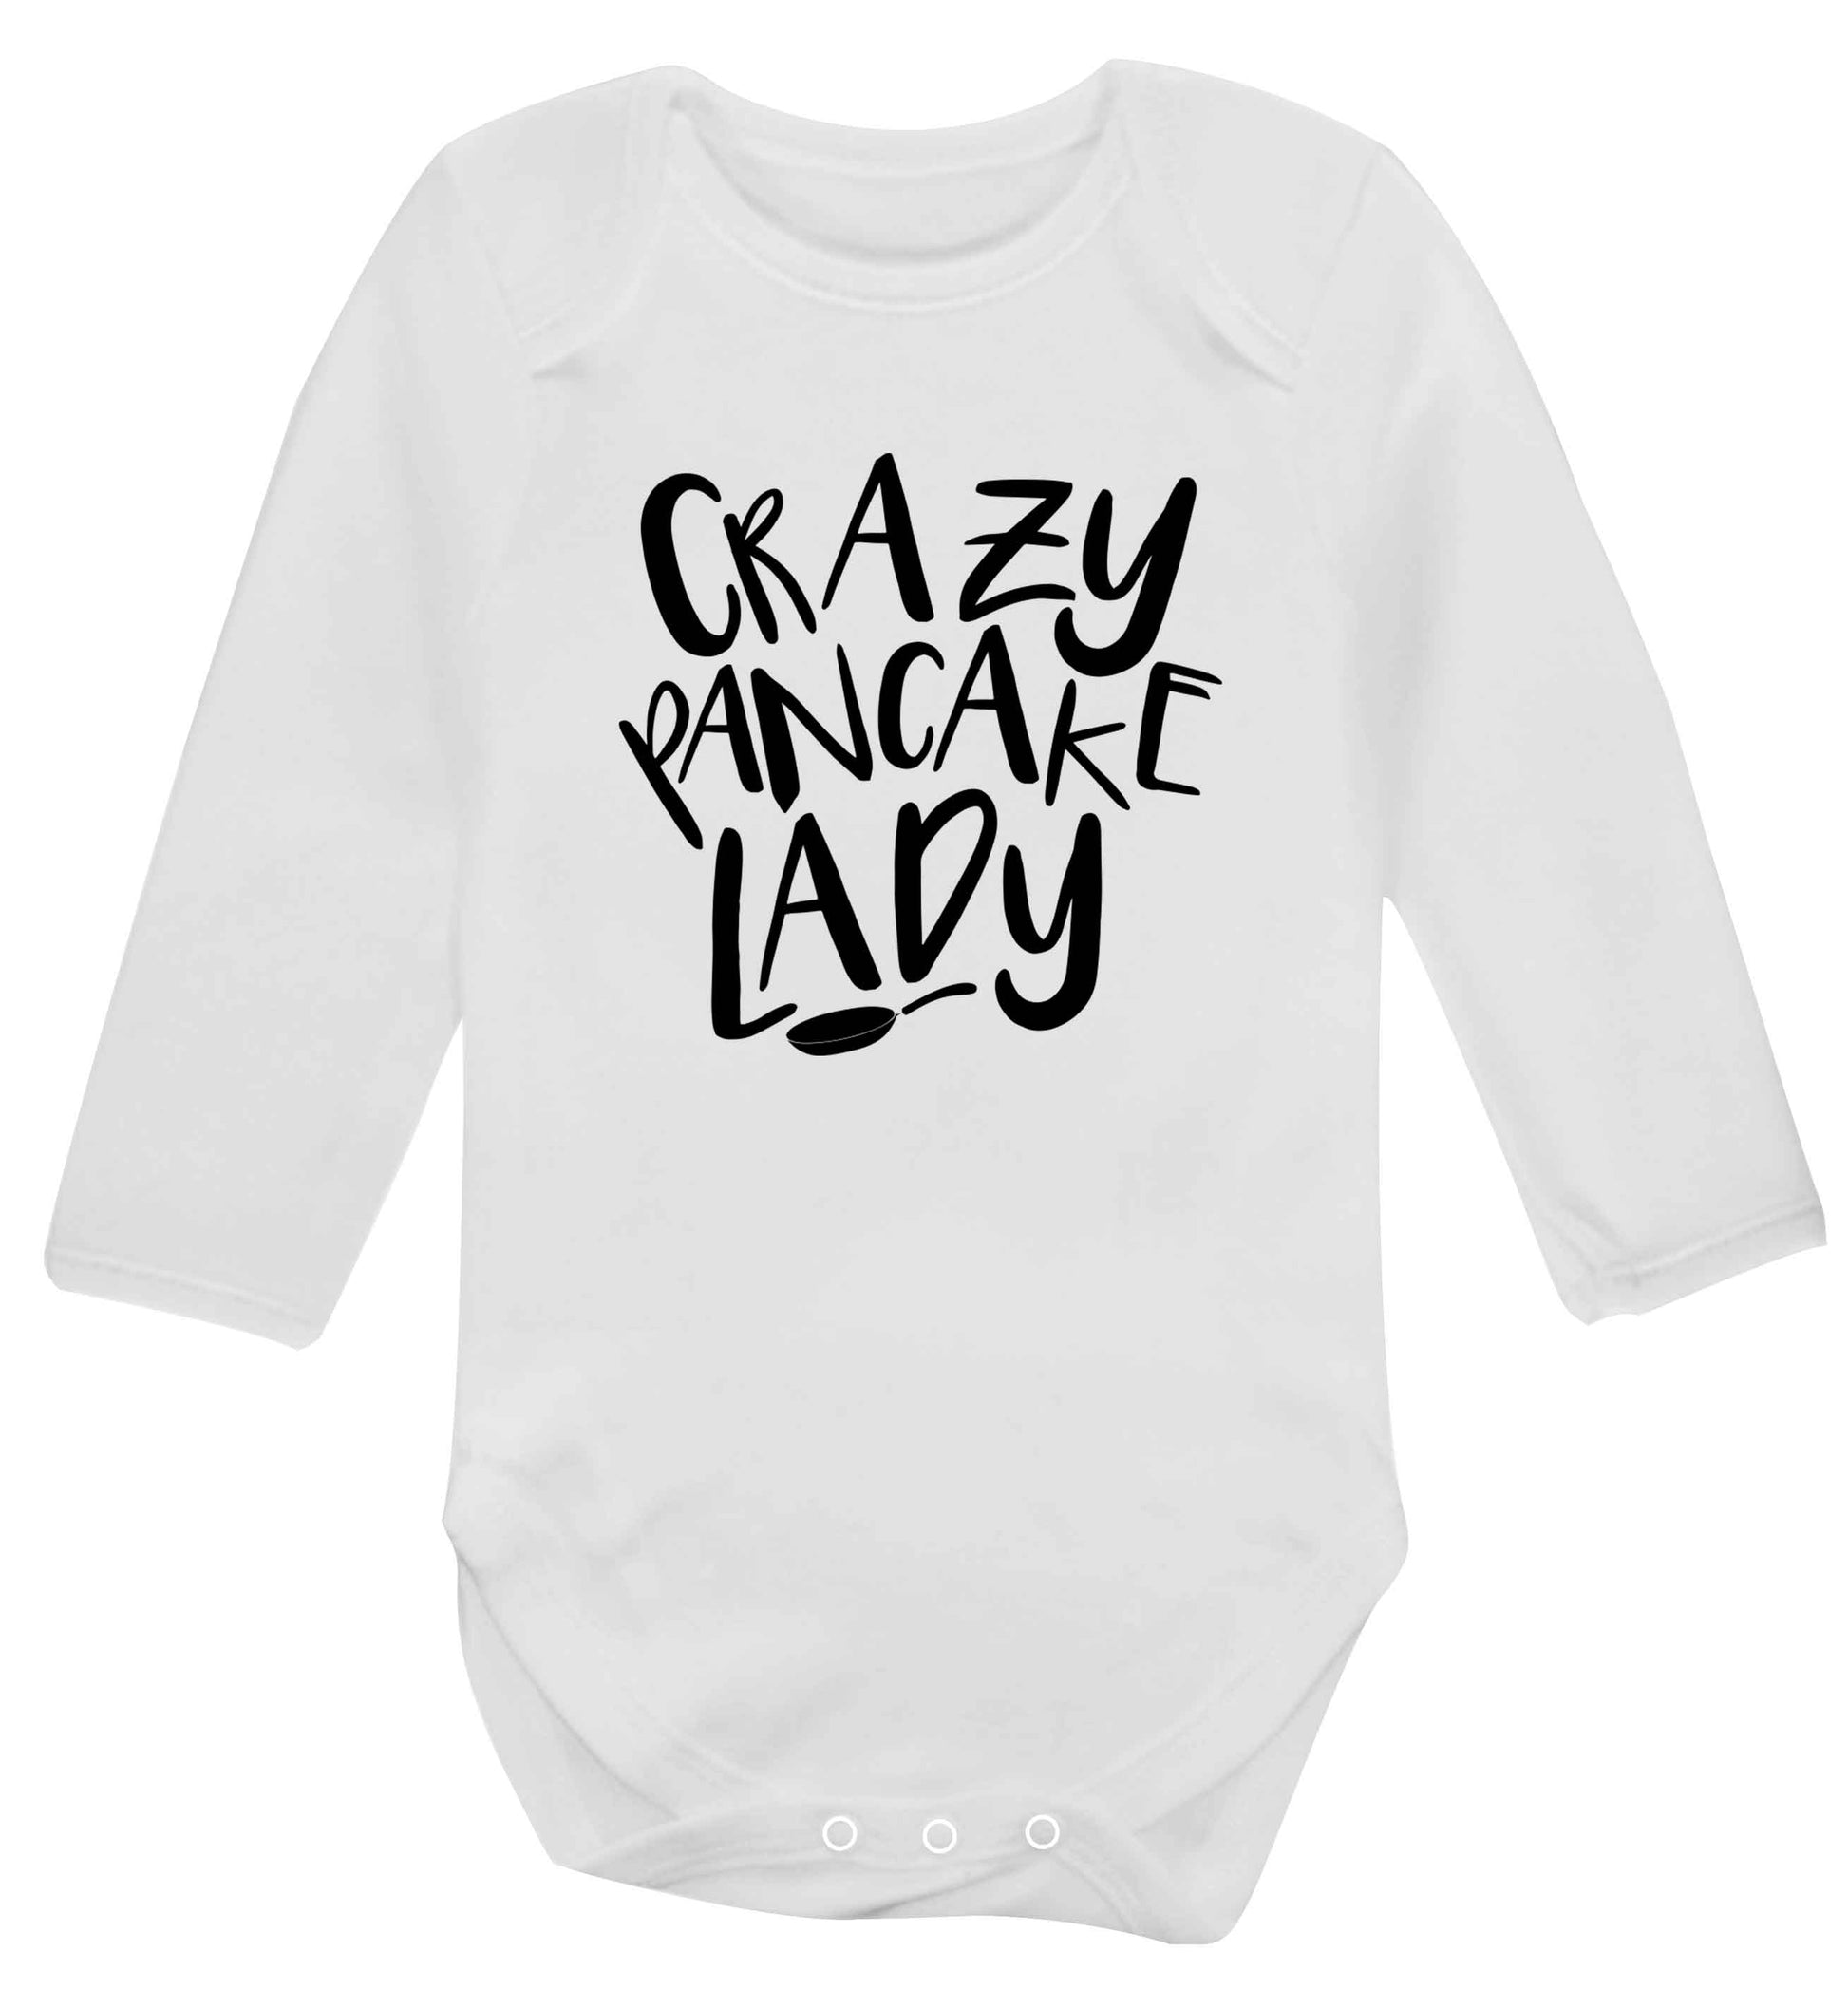 Crazy pancake lady baby vest long sleeved white 6-12 months